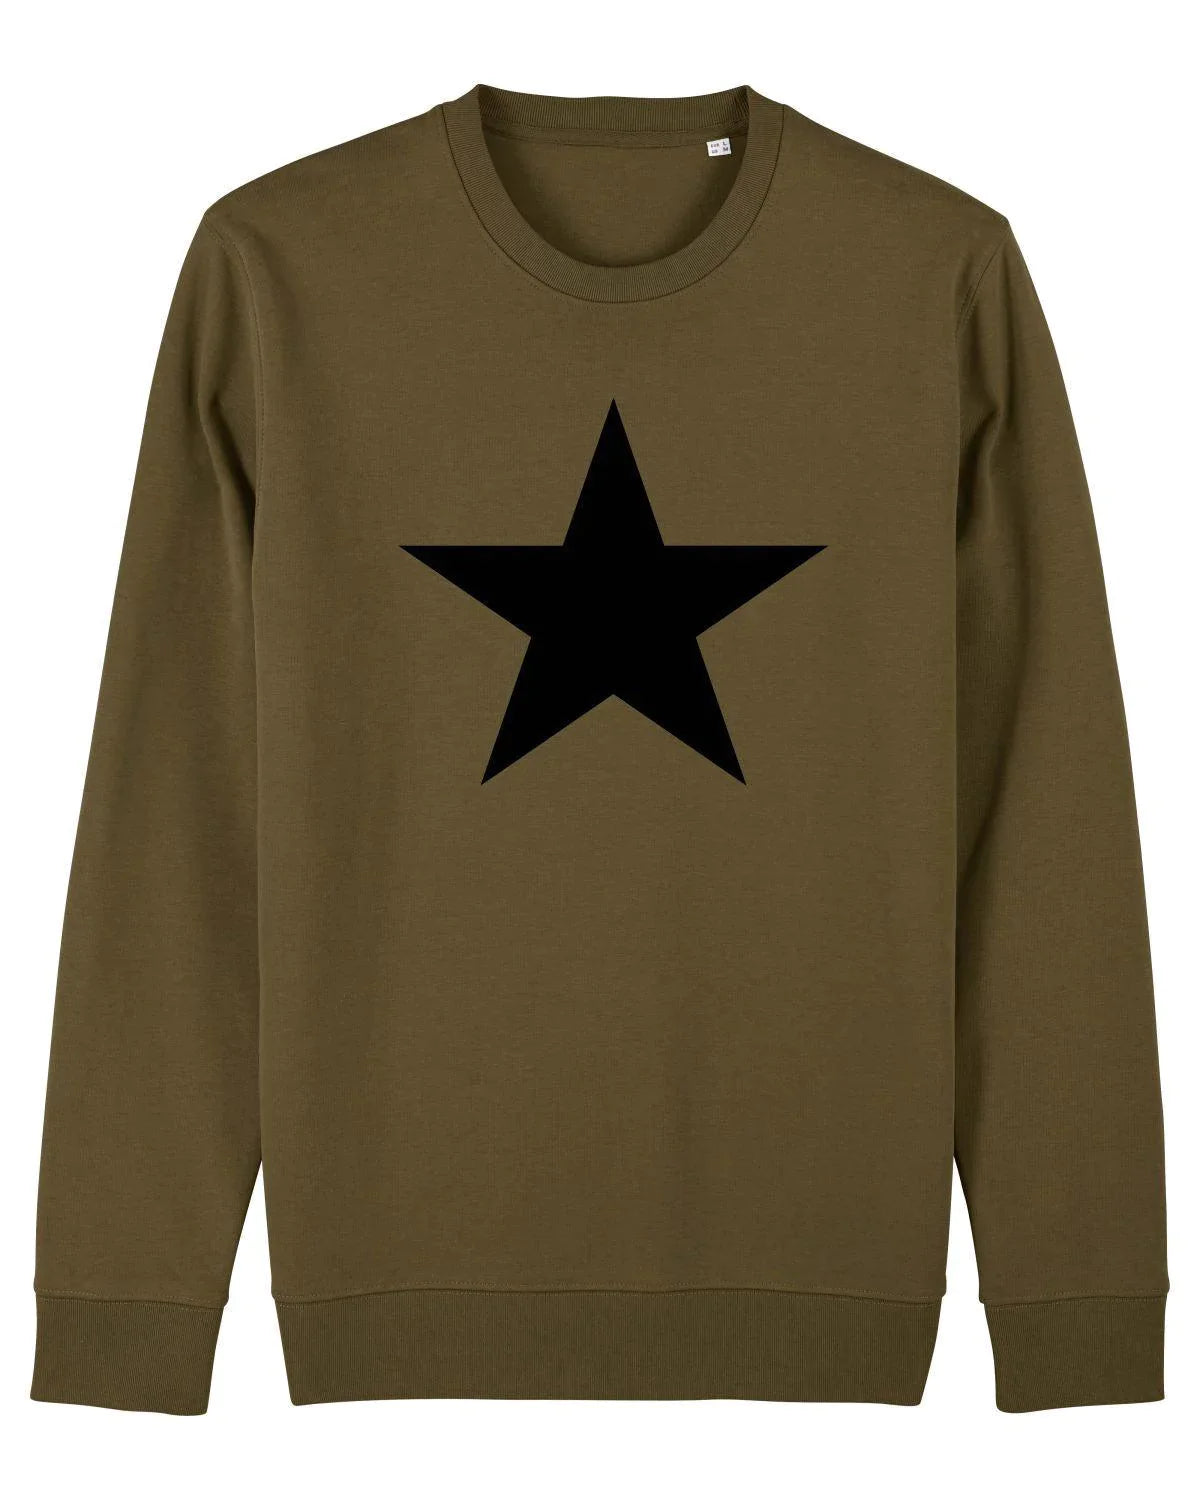 BLACK STAR: As Worn By Michael Stipe (R.E.M) and Indie Kids. T-Shirt And Sweatshirt - SOUND IS COLOUR